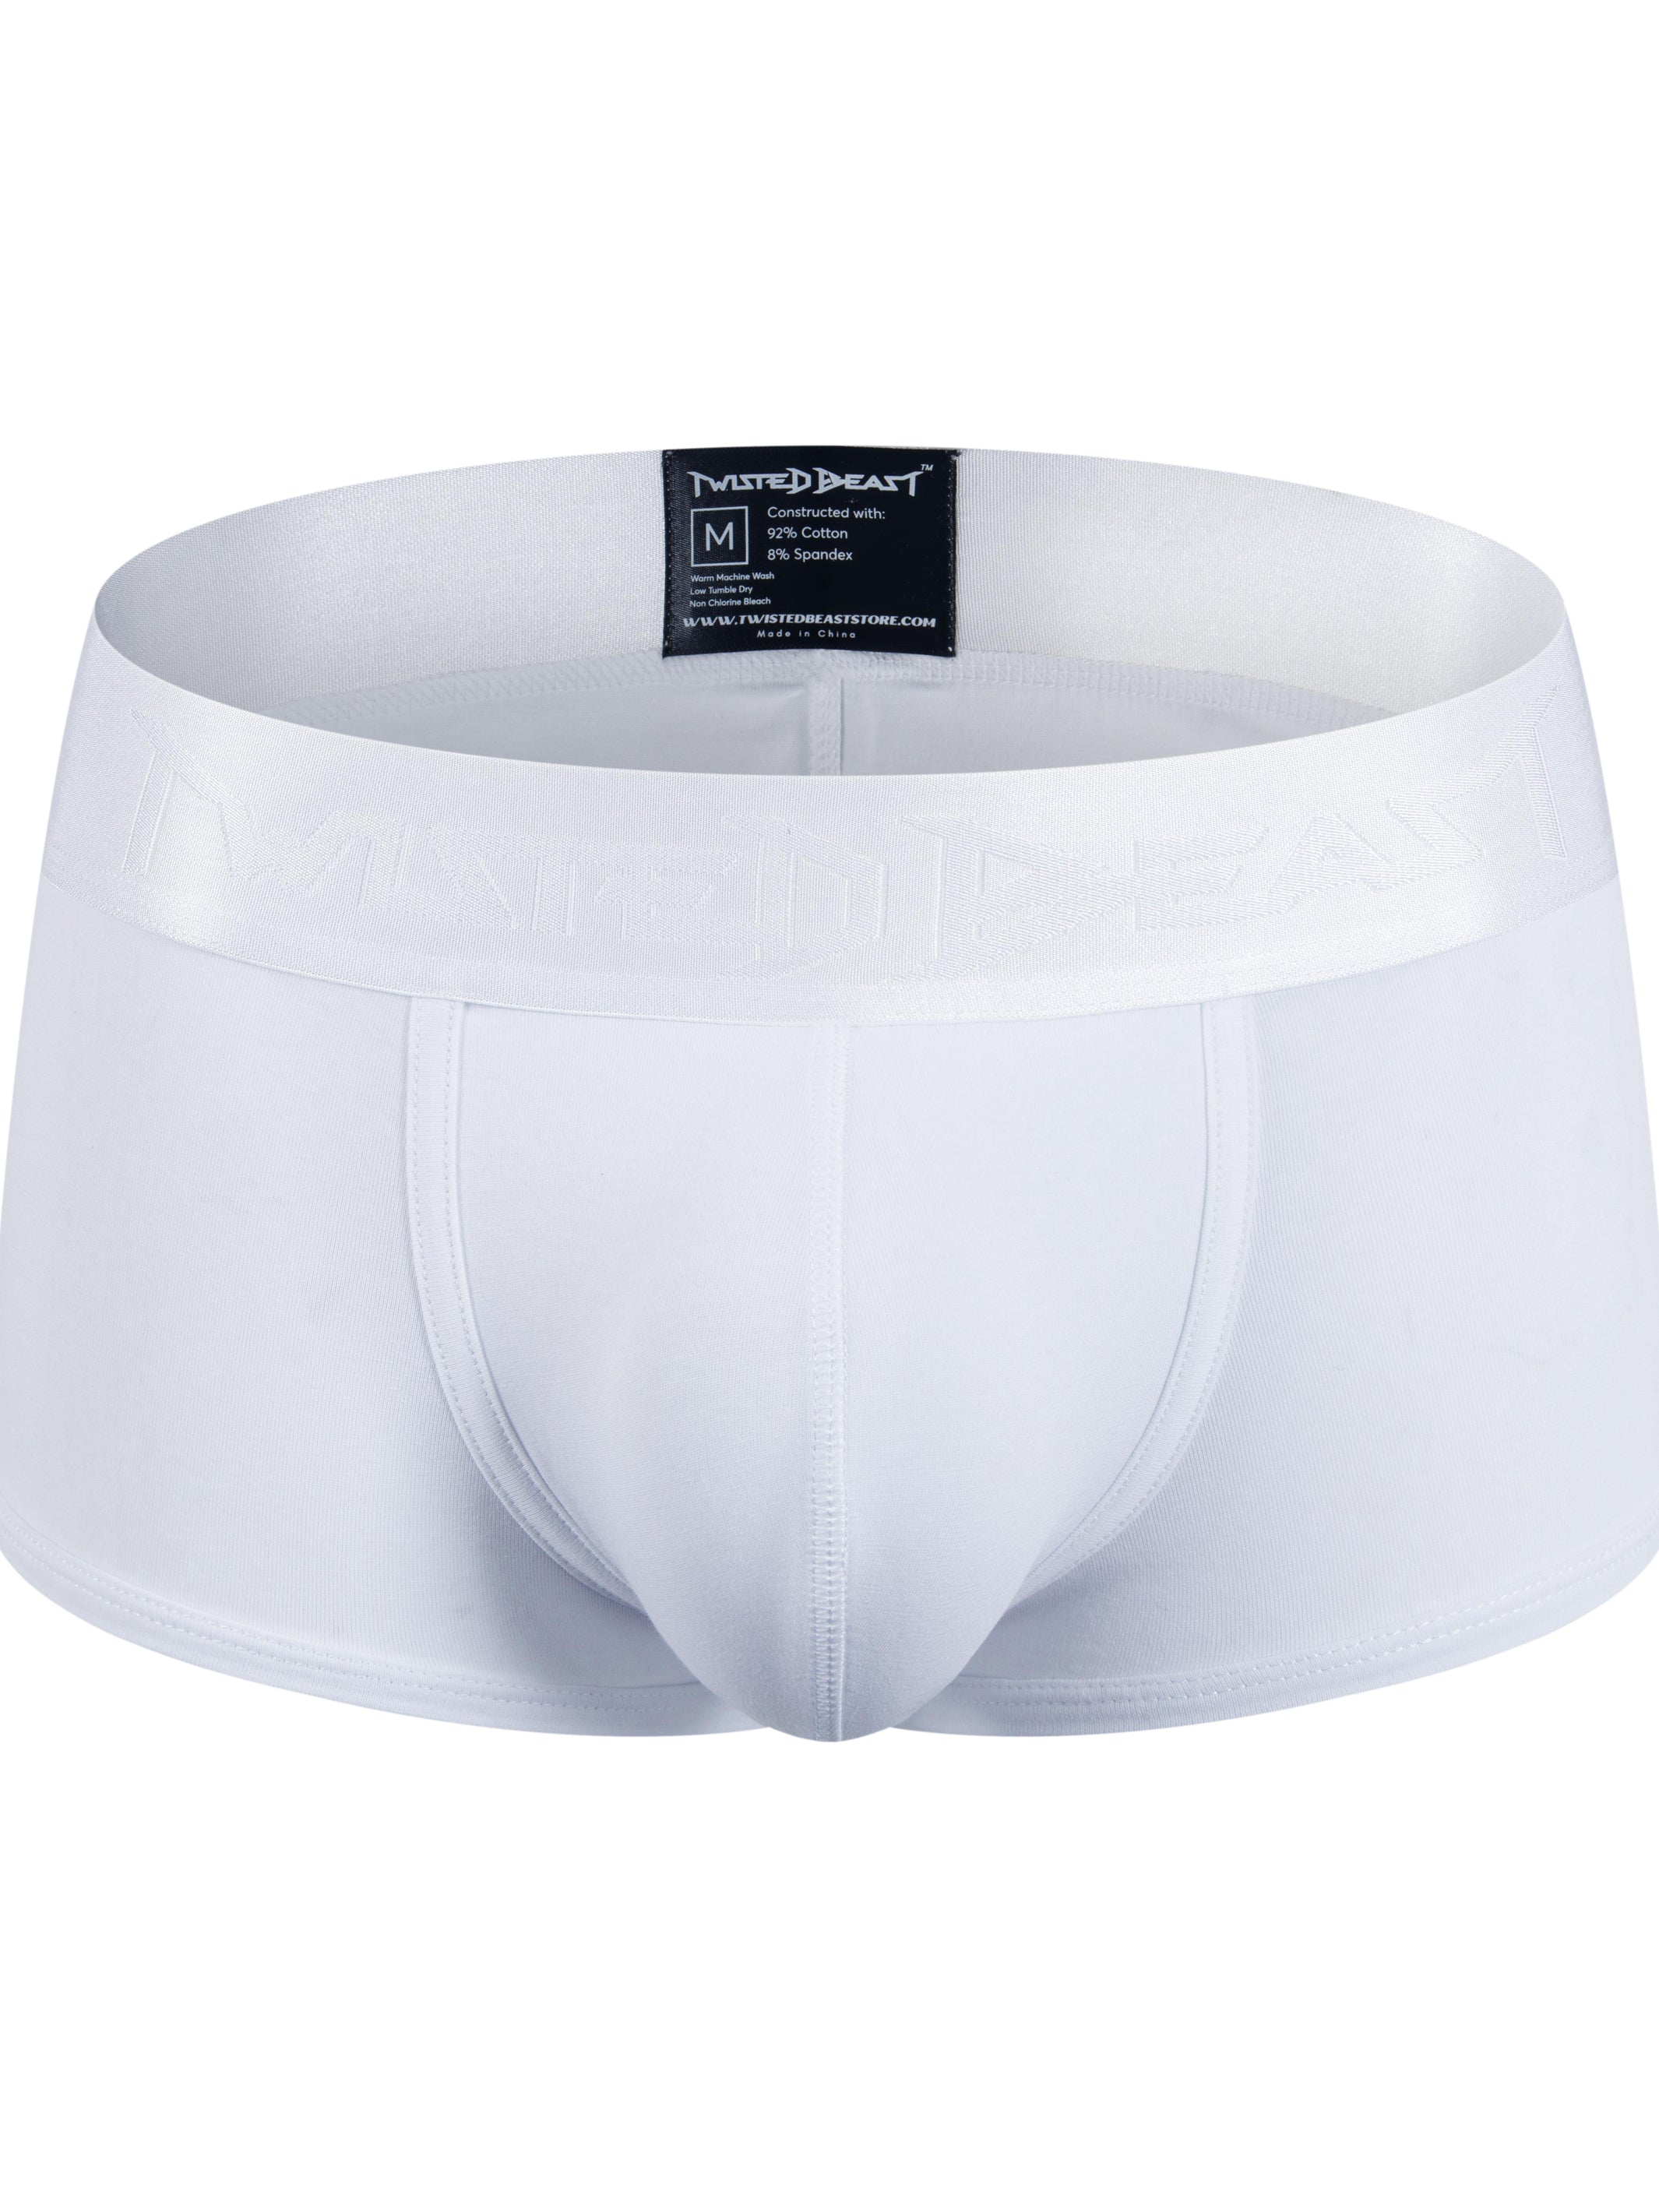 A front product photo showing Phantom Boxers in white.